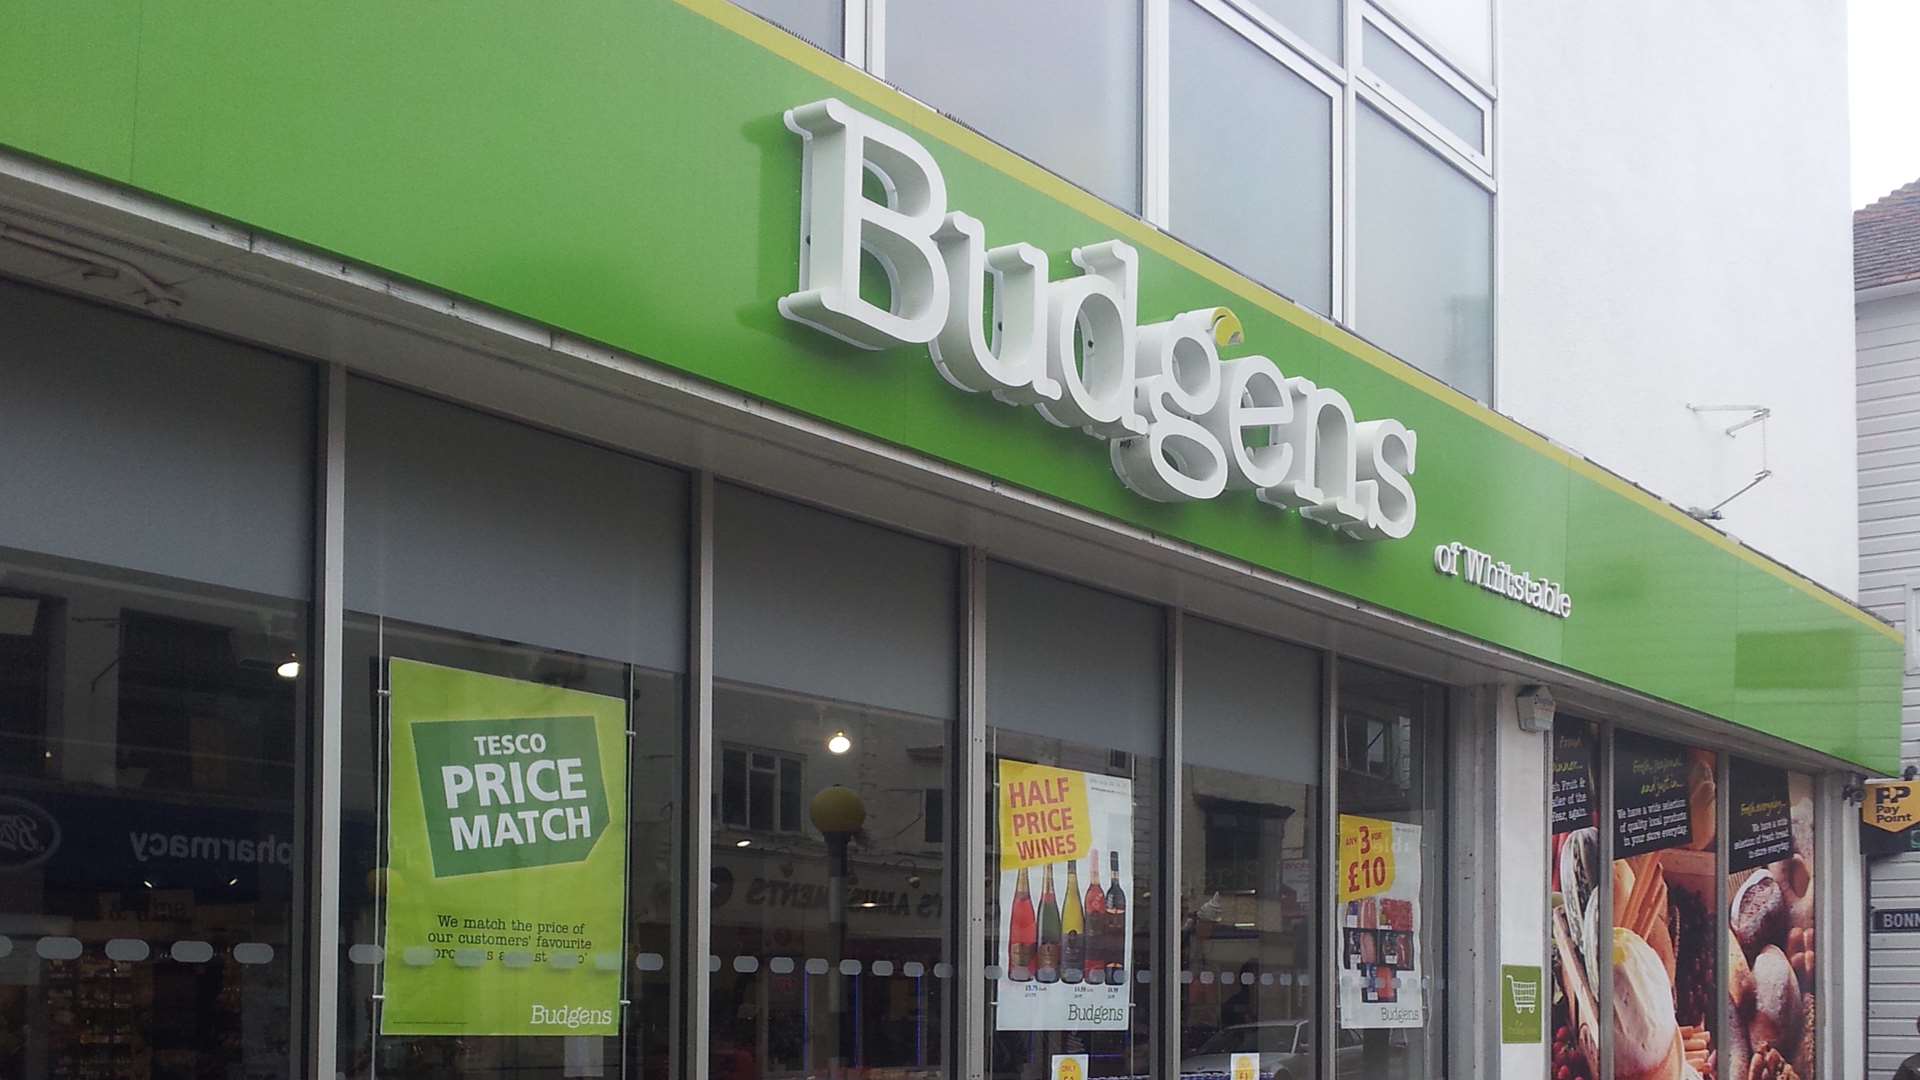 The Budgens supermarket in Whitstable High Street will become a Sainsbury's